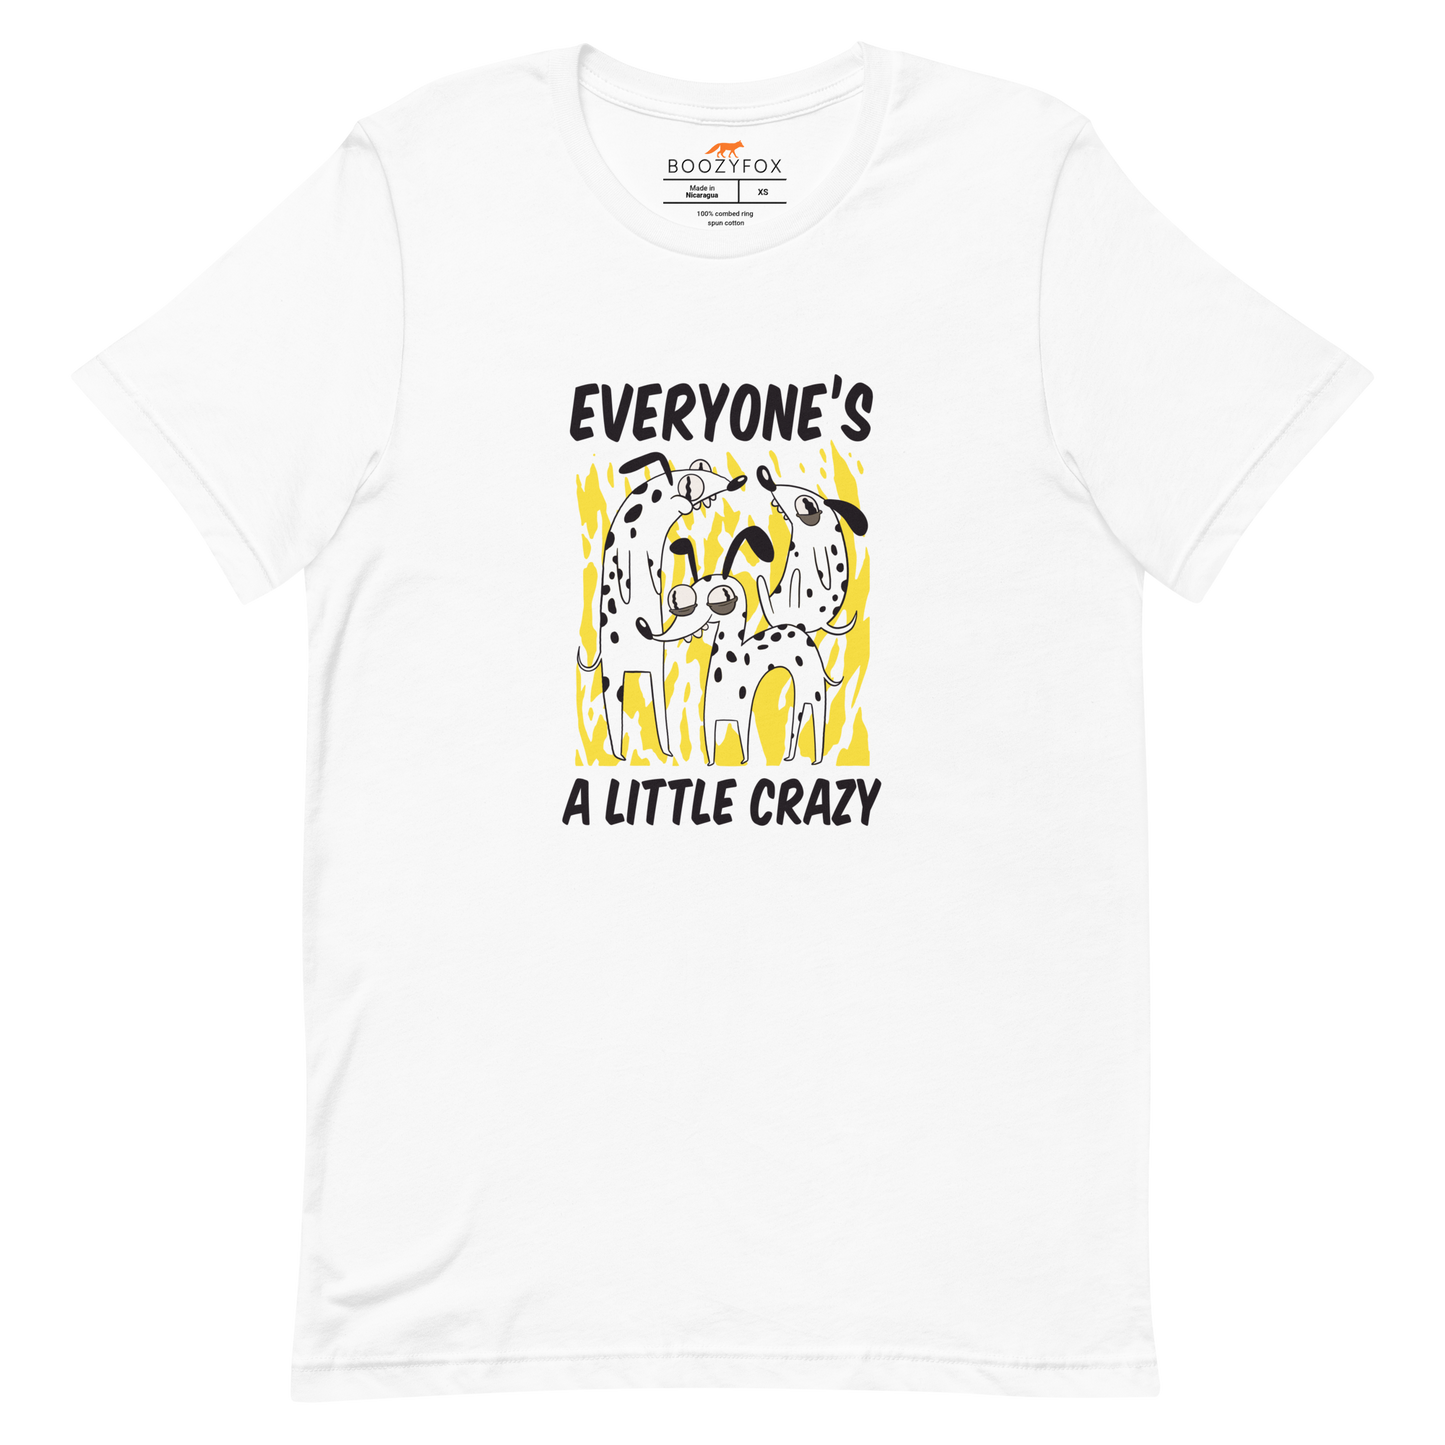 White Premium Dog T-Shirt featuring a Everyone's A Little Crazy graphic on the chest - Funny Graphic Dog Tees - Boozy Fox